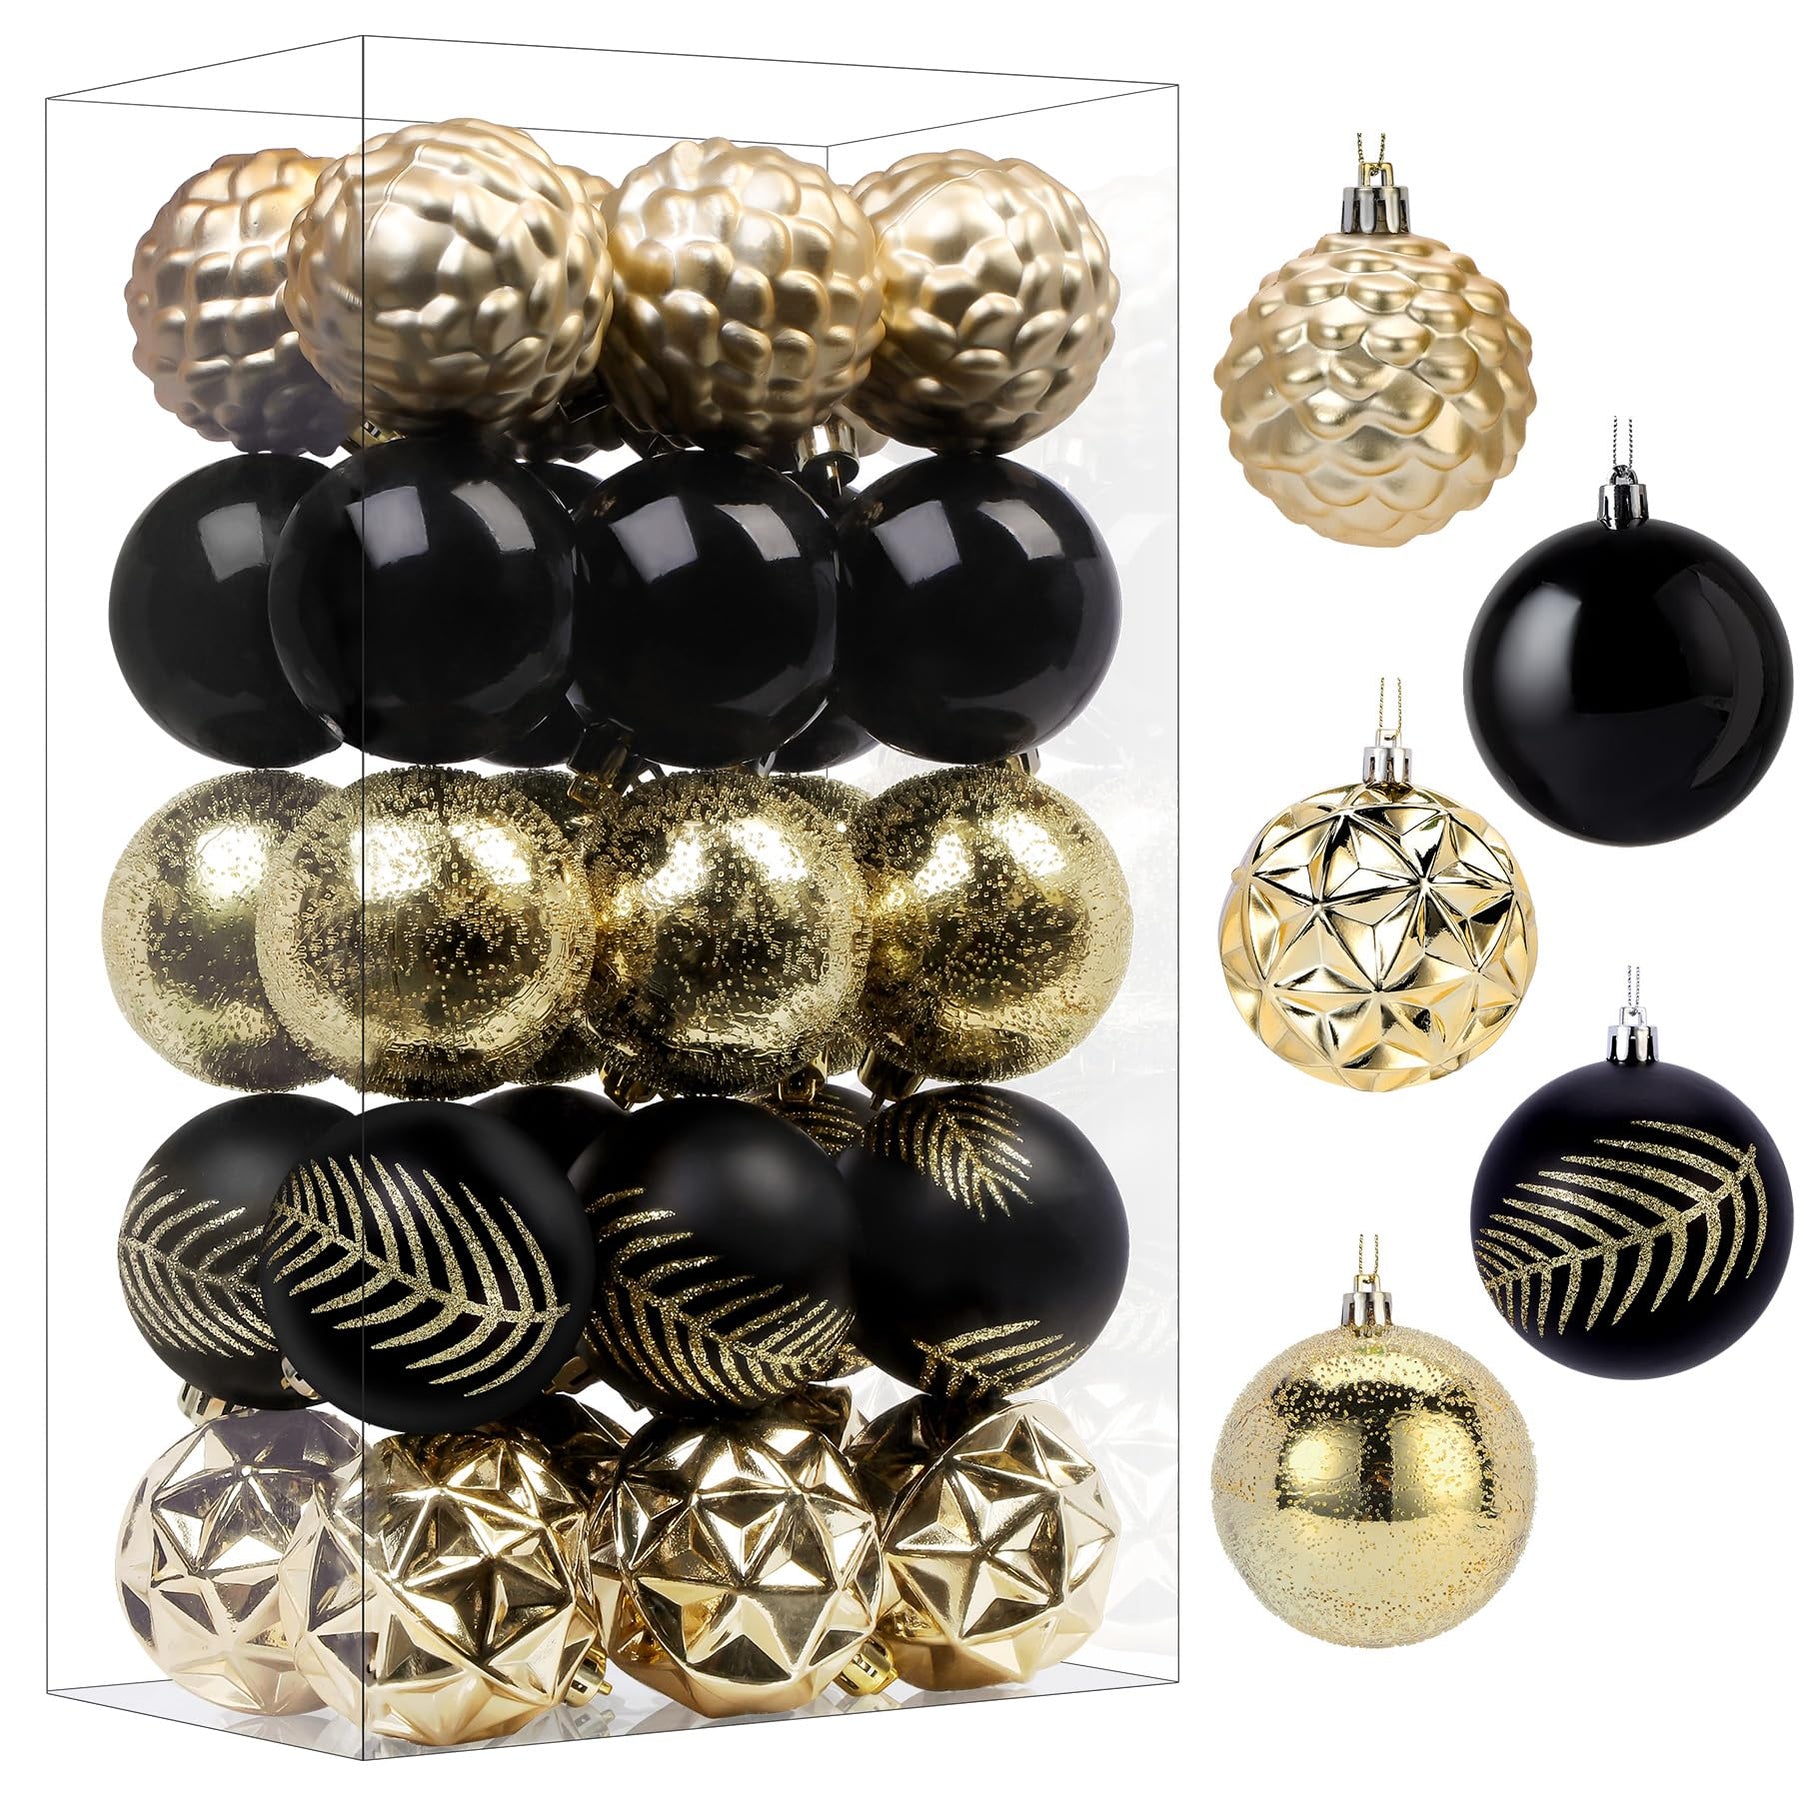 30ct 2.36 Inch Red & Gold Christmas Tree Balls Ornaments, 60mm